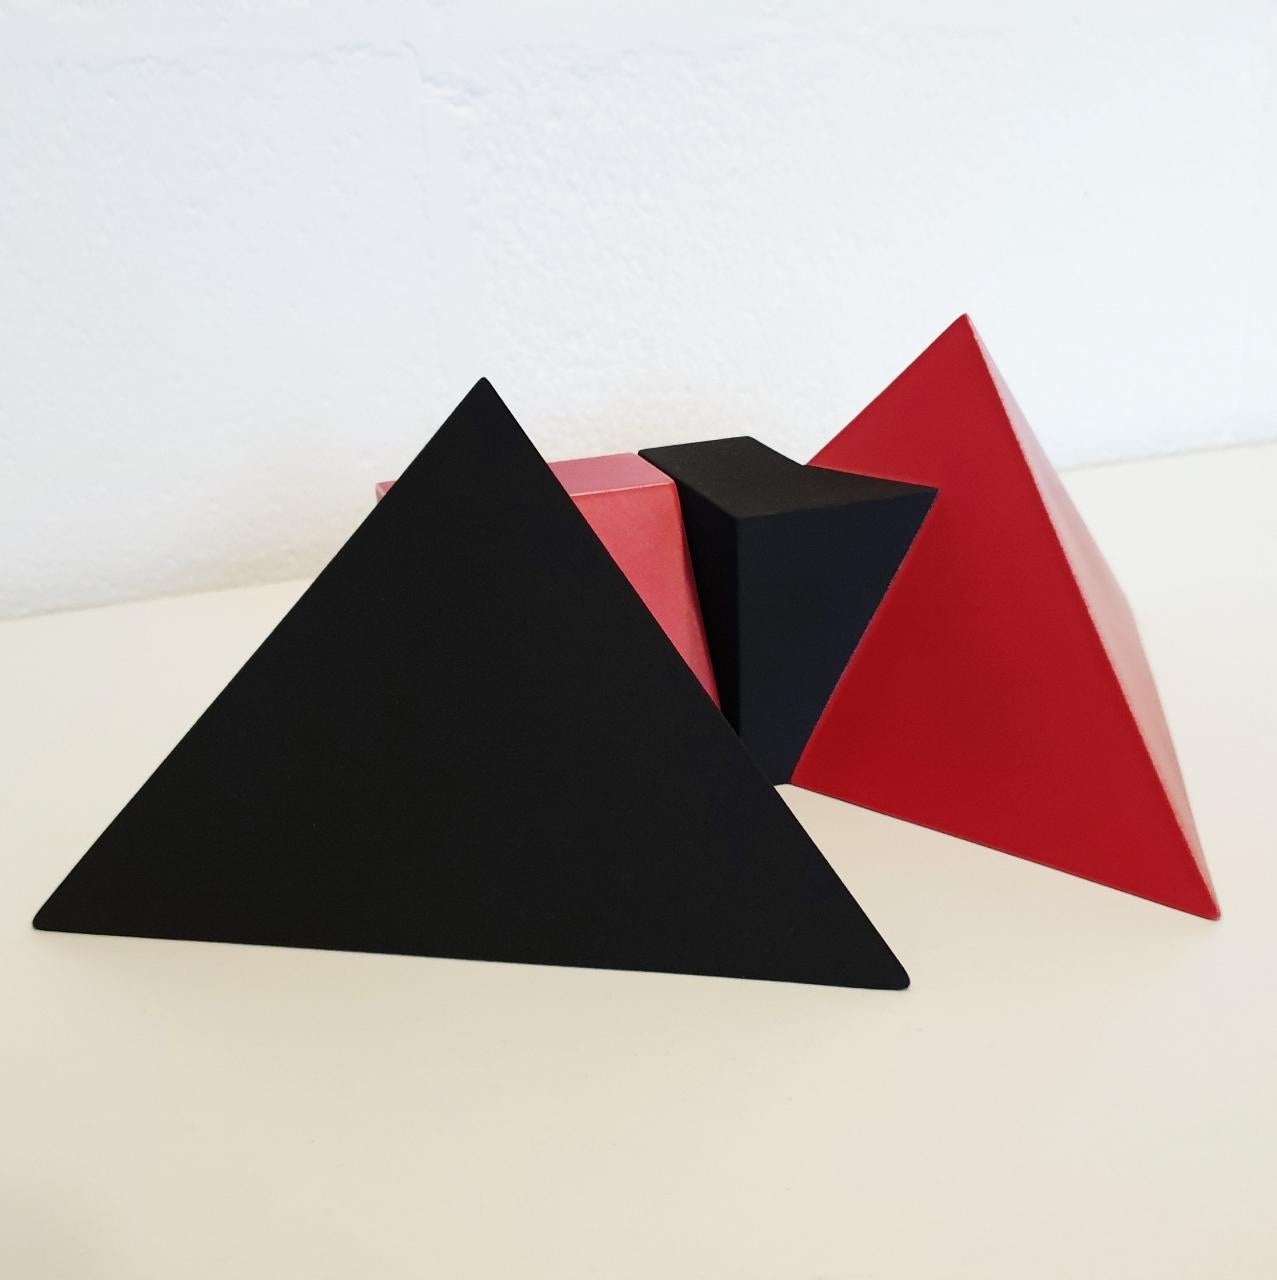 Sculpture SC1502 (red) is a contemporary modern abstract geometric object sculpture by Dutch visual artist Let de Kok. 
This sculpture consists of two ceramic elements, the red surface has a smooth finish and the black surface is textured and rough